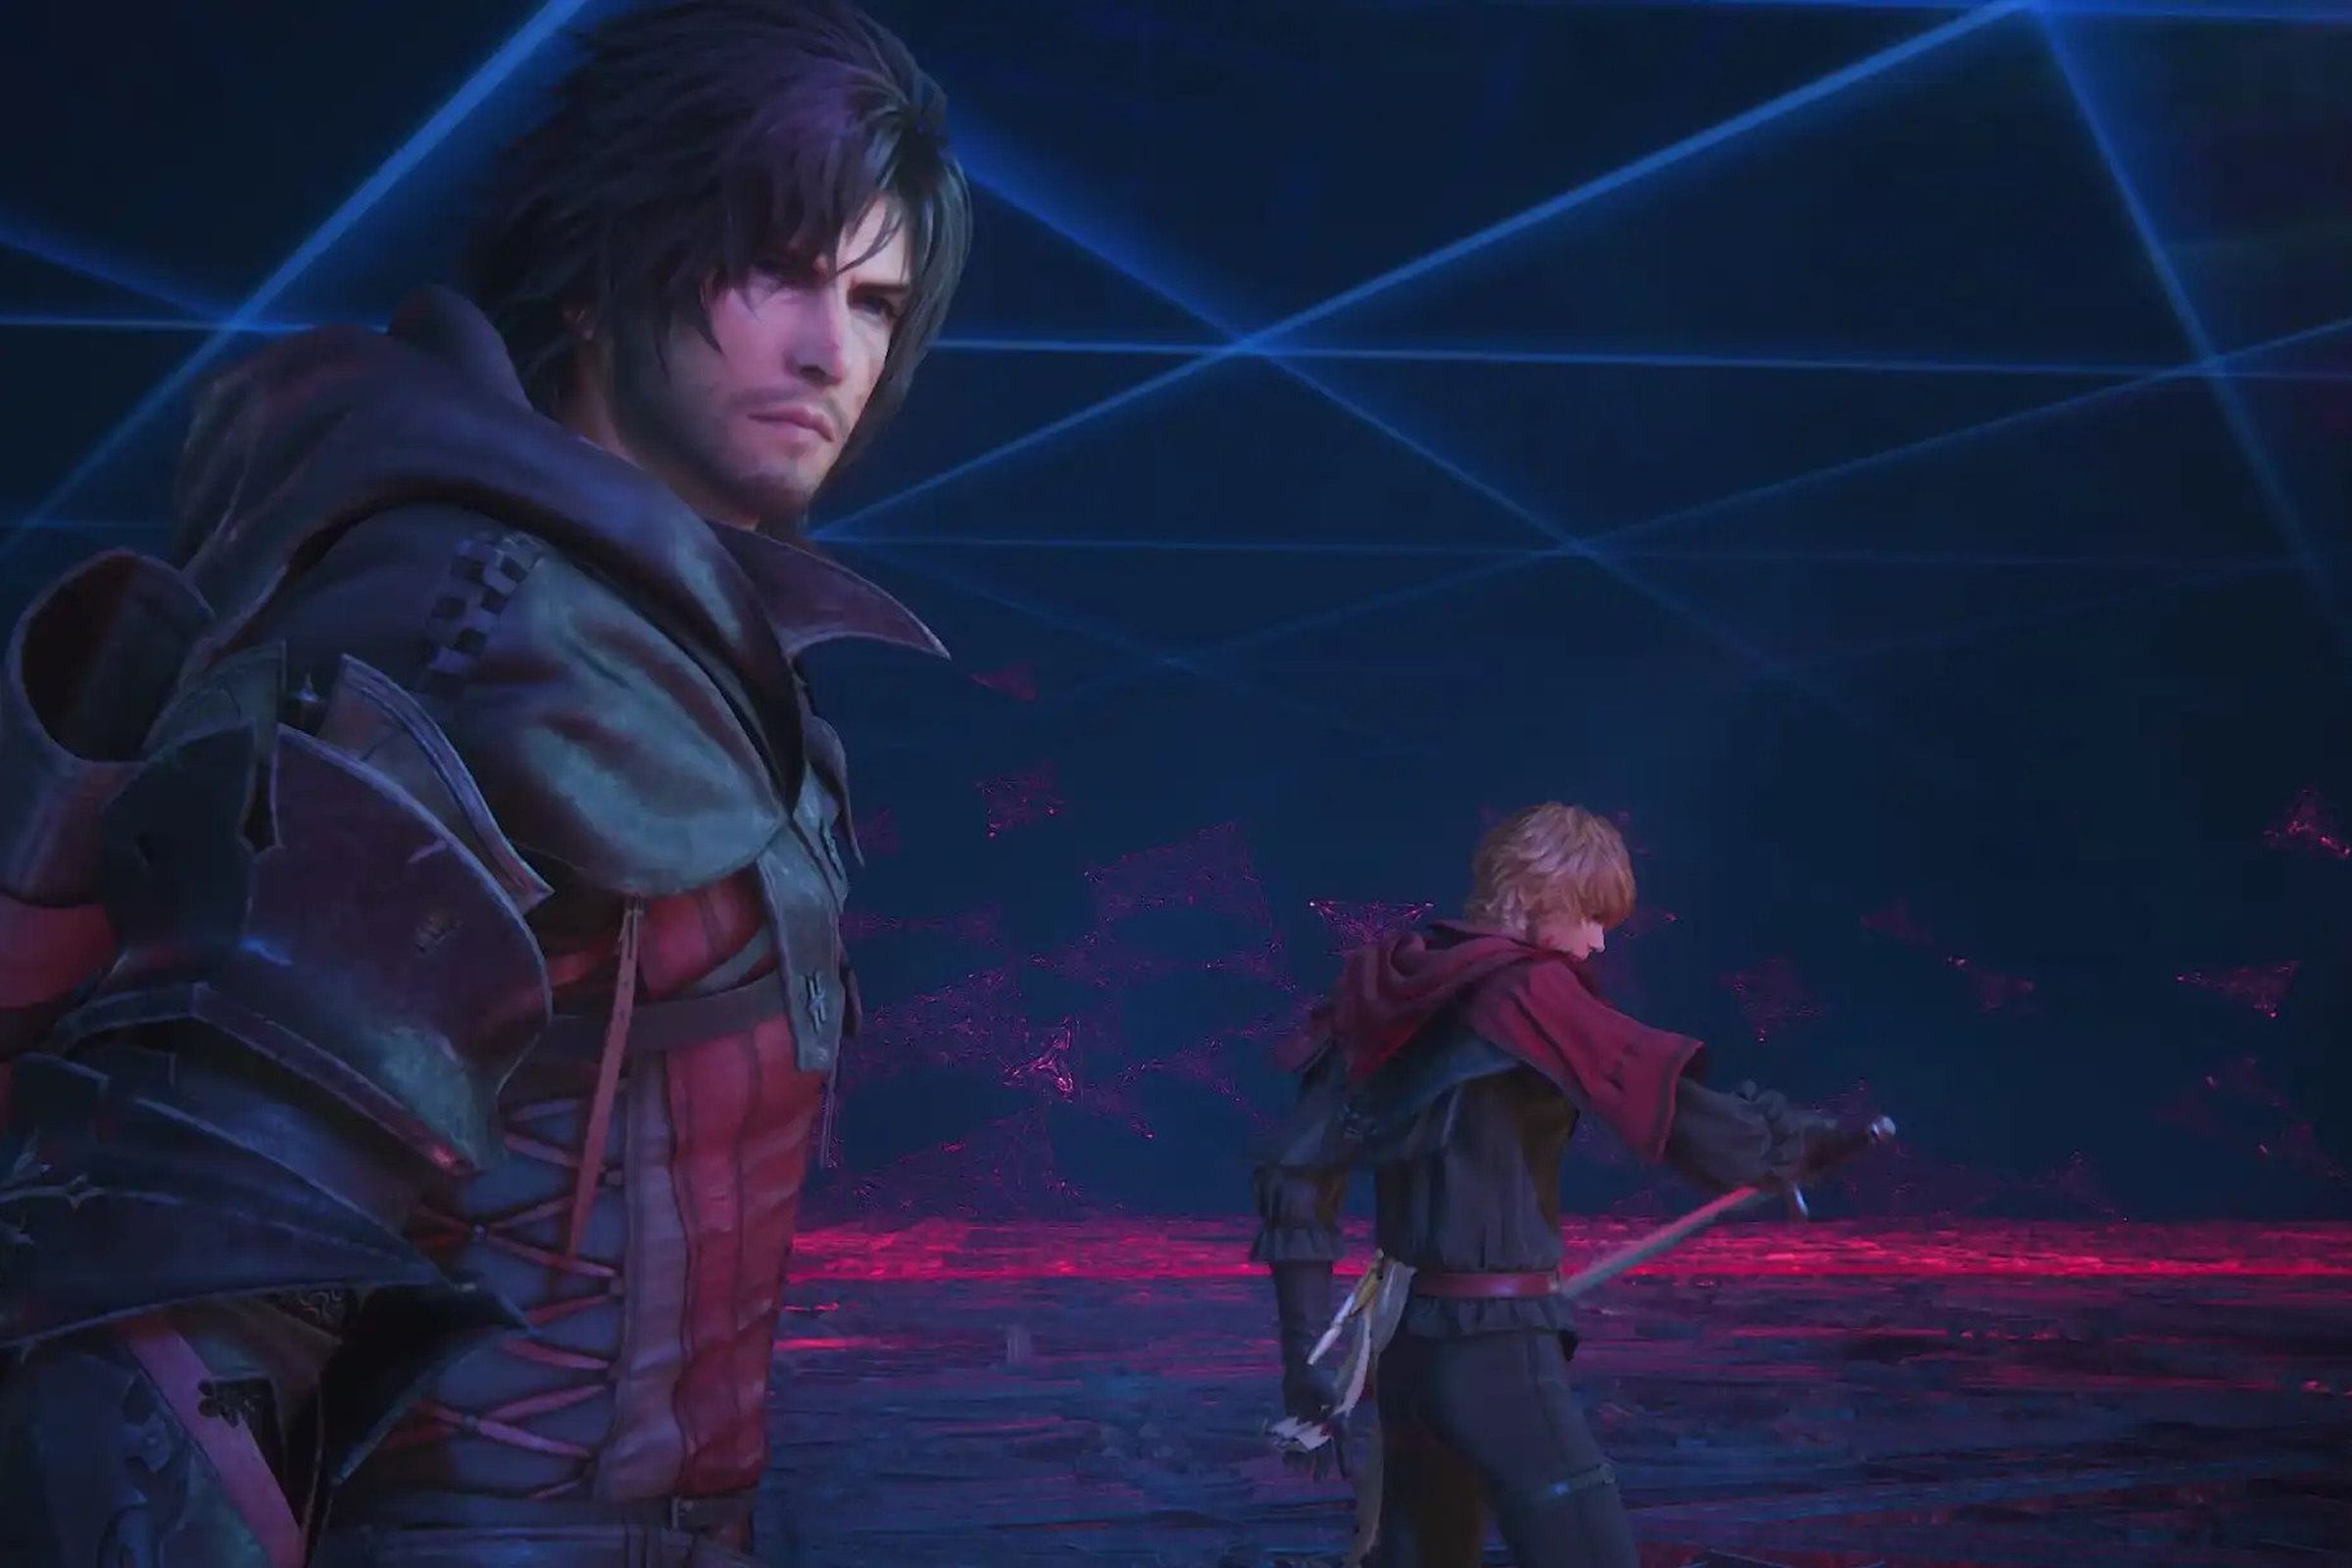 Screenshot from Final Fantasy XVI DLC featuring the main characters Clive and his brother Joshua